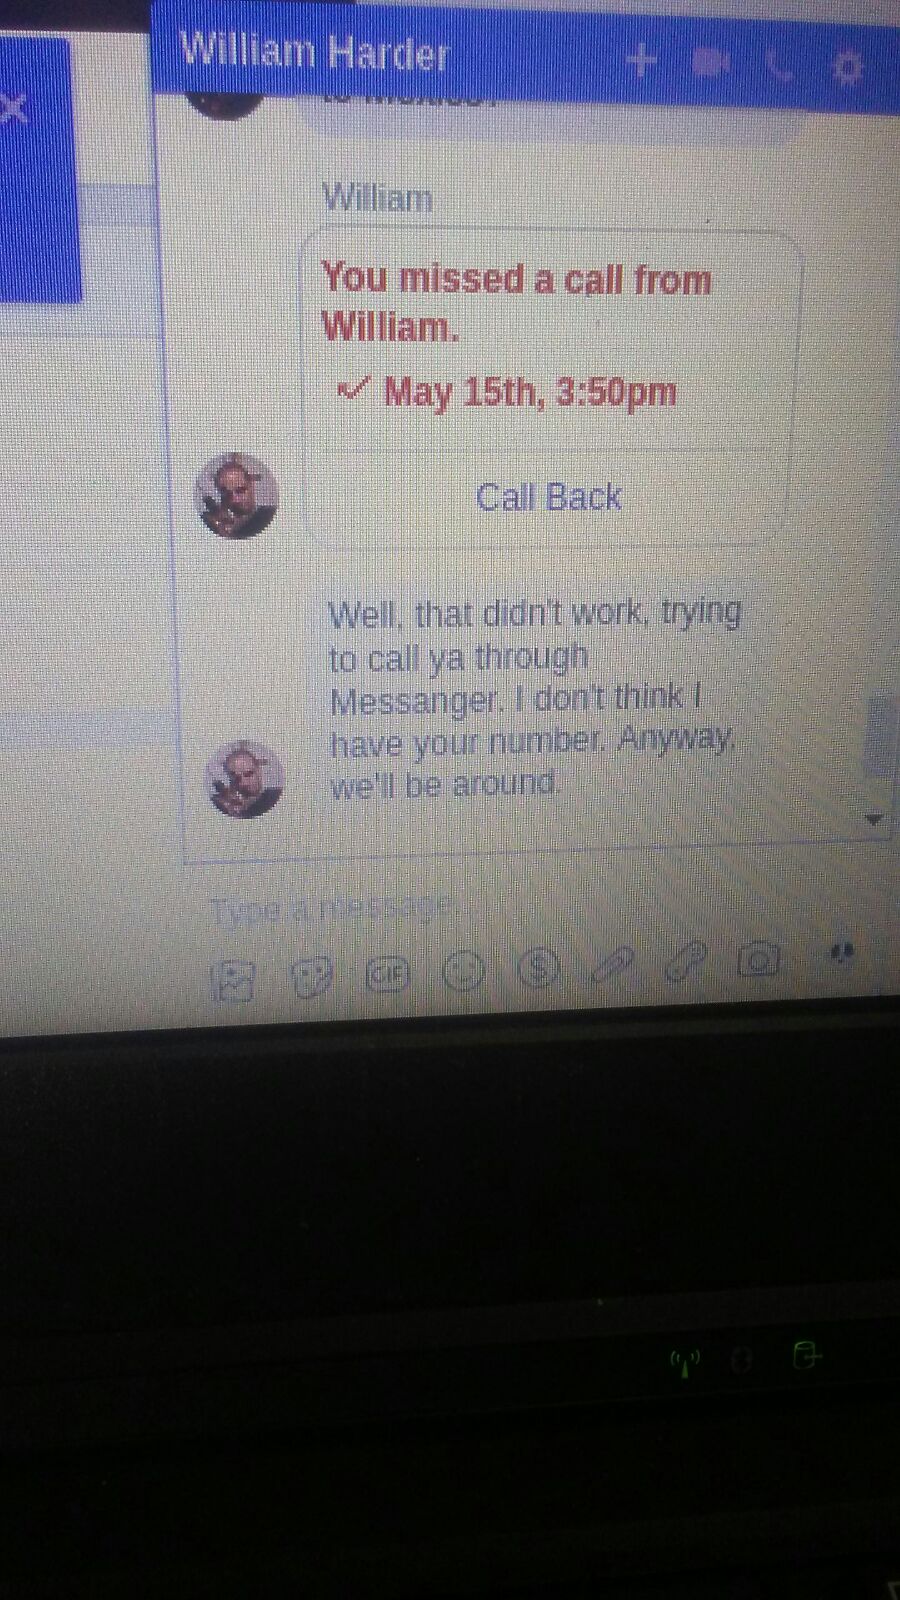 More of his threatening messages on facebook